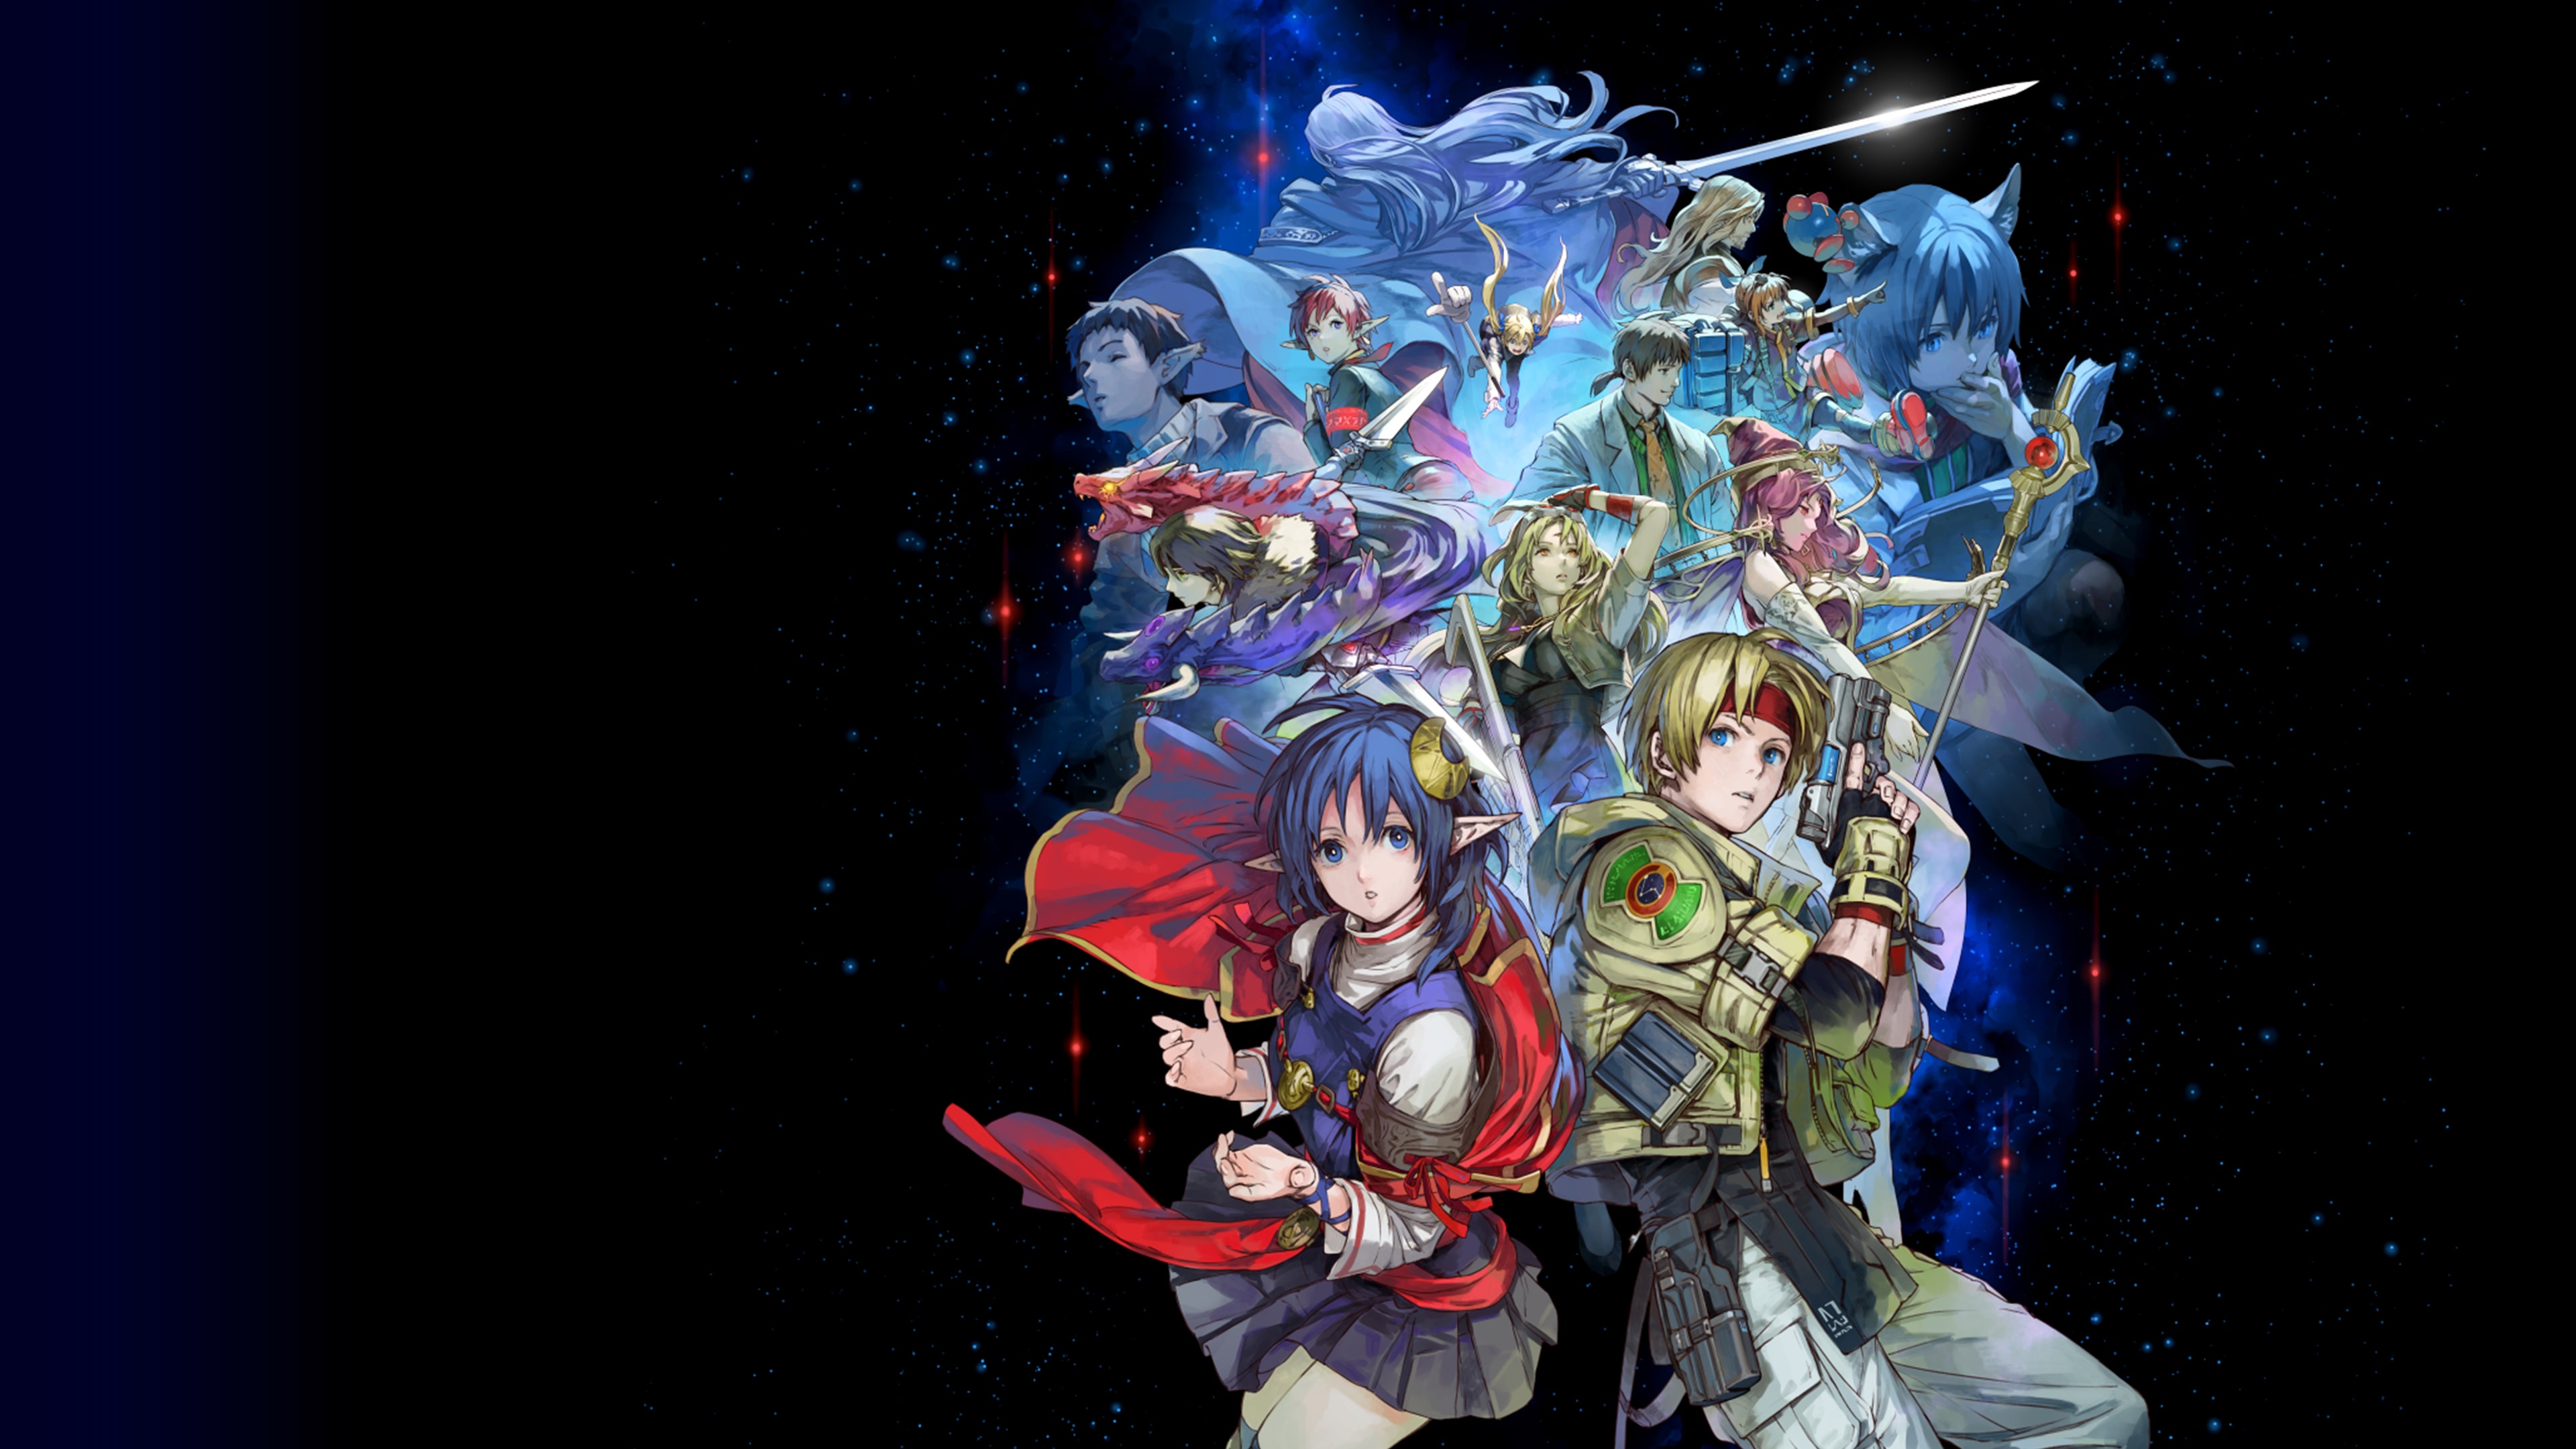 STAR OCEAN THE SECOND STORY R - PS4 & PS5 (Simplified Chinese, Korean, Traditional Chinese)